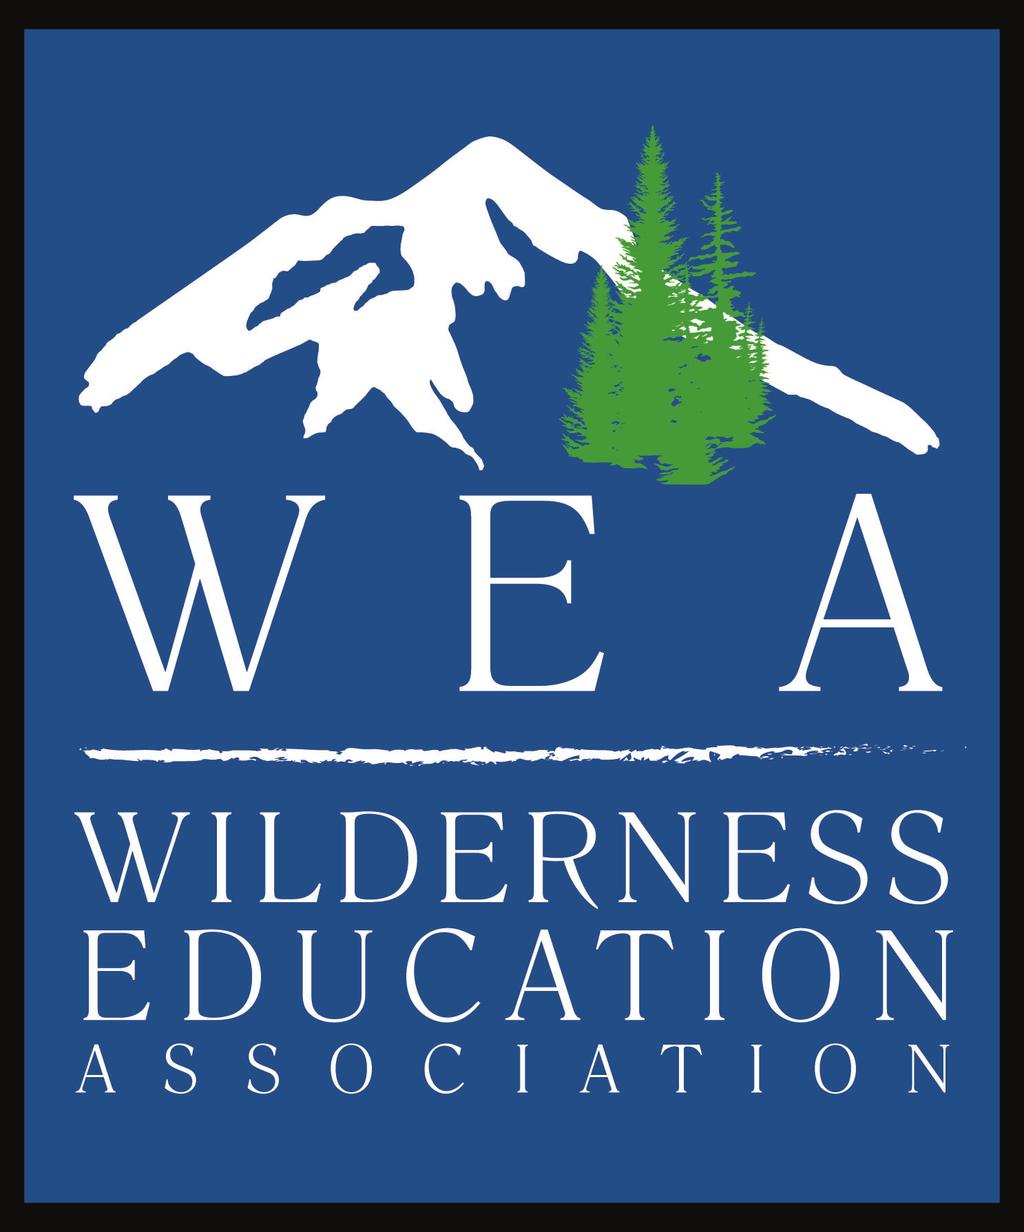 2018 AORE WEA Joint National Conference Snowbird, UT October 24-26, 2018 Attendees MUST register online at www.aore.